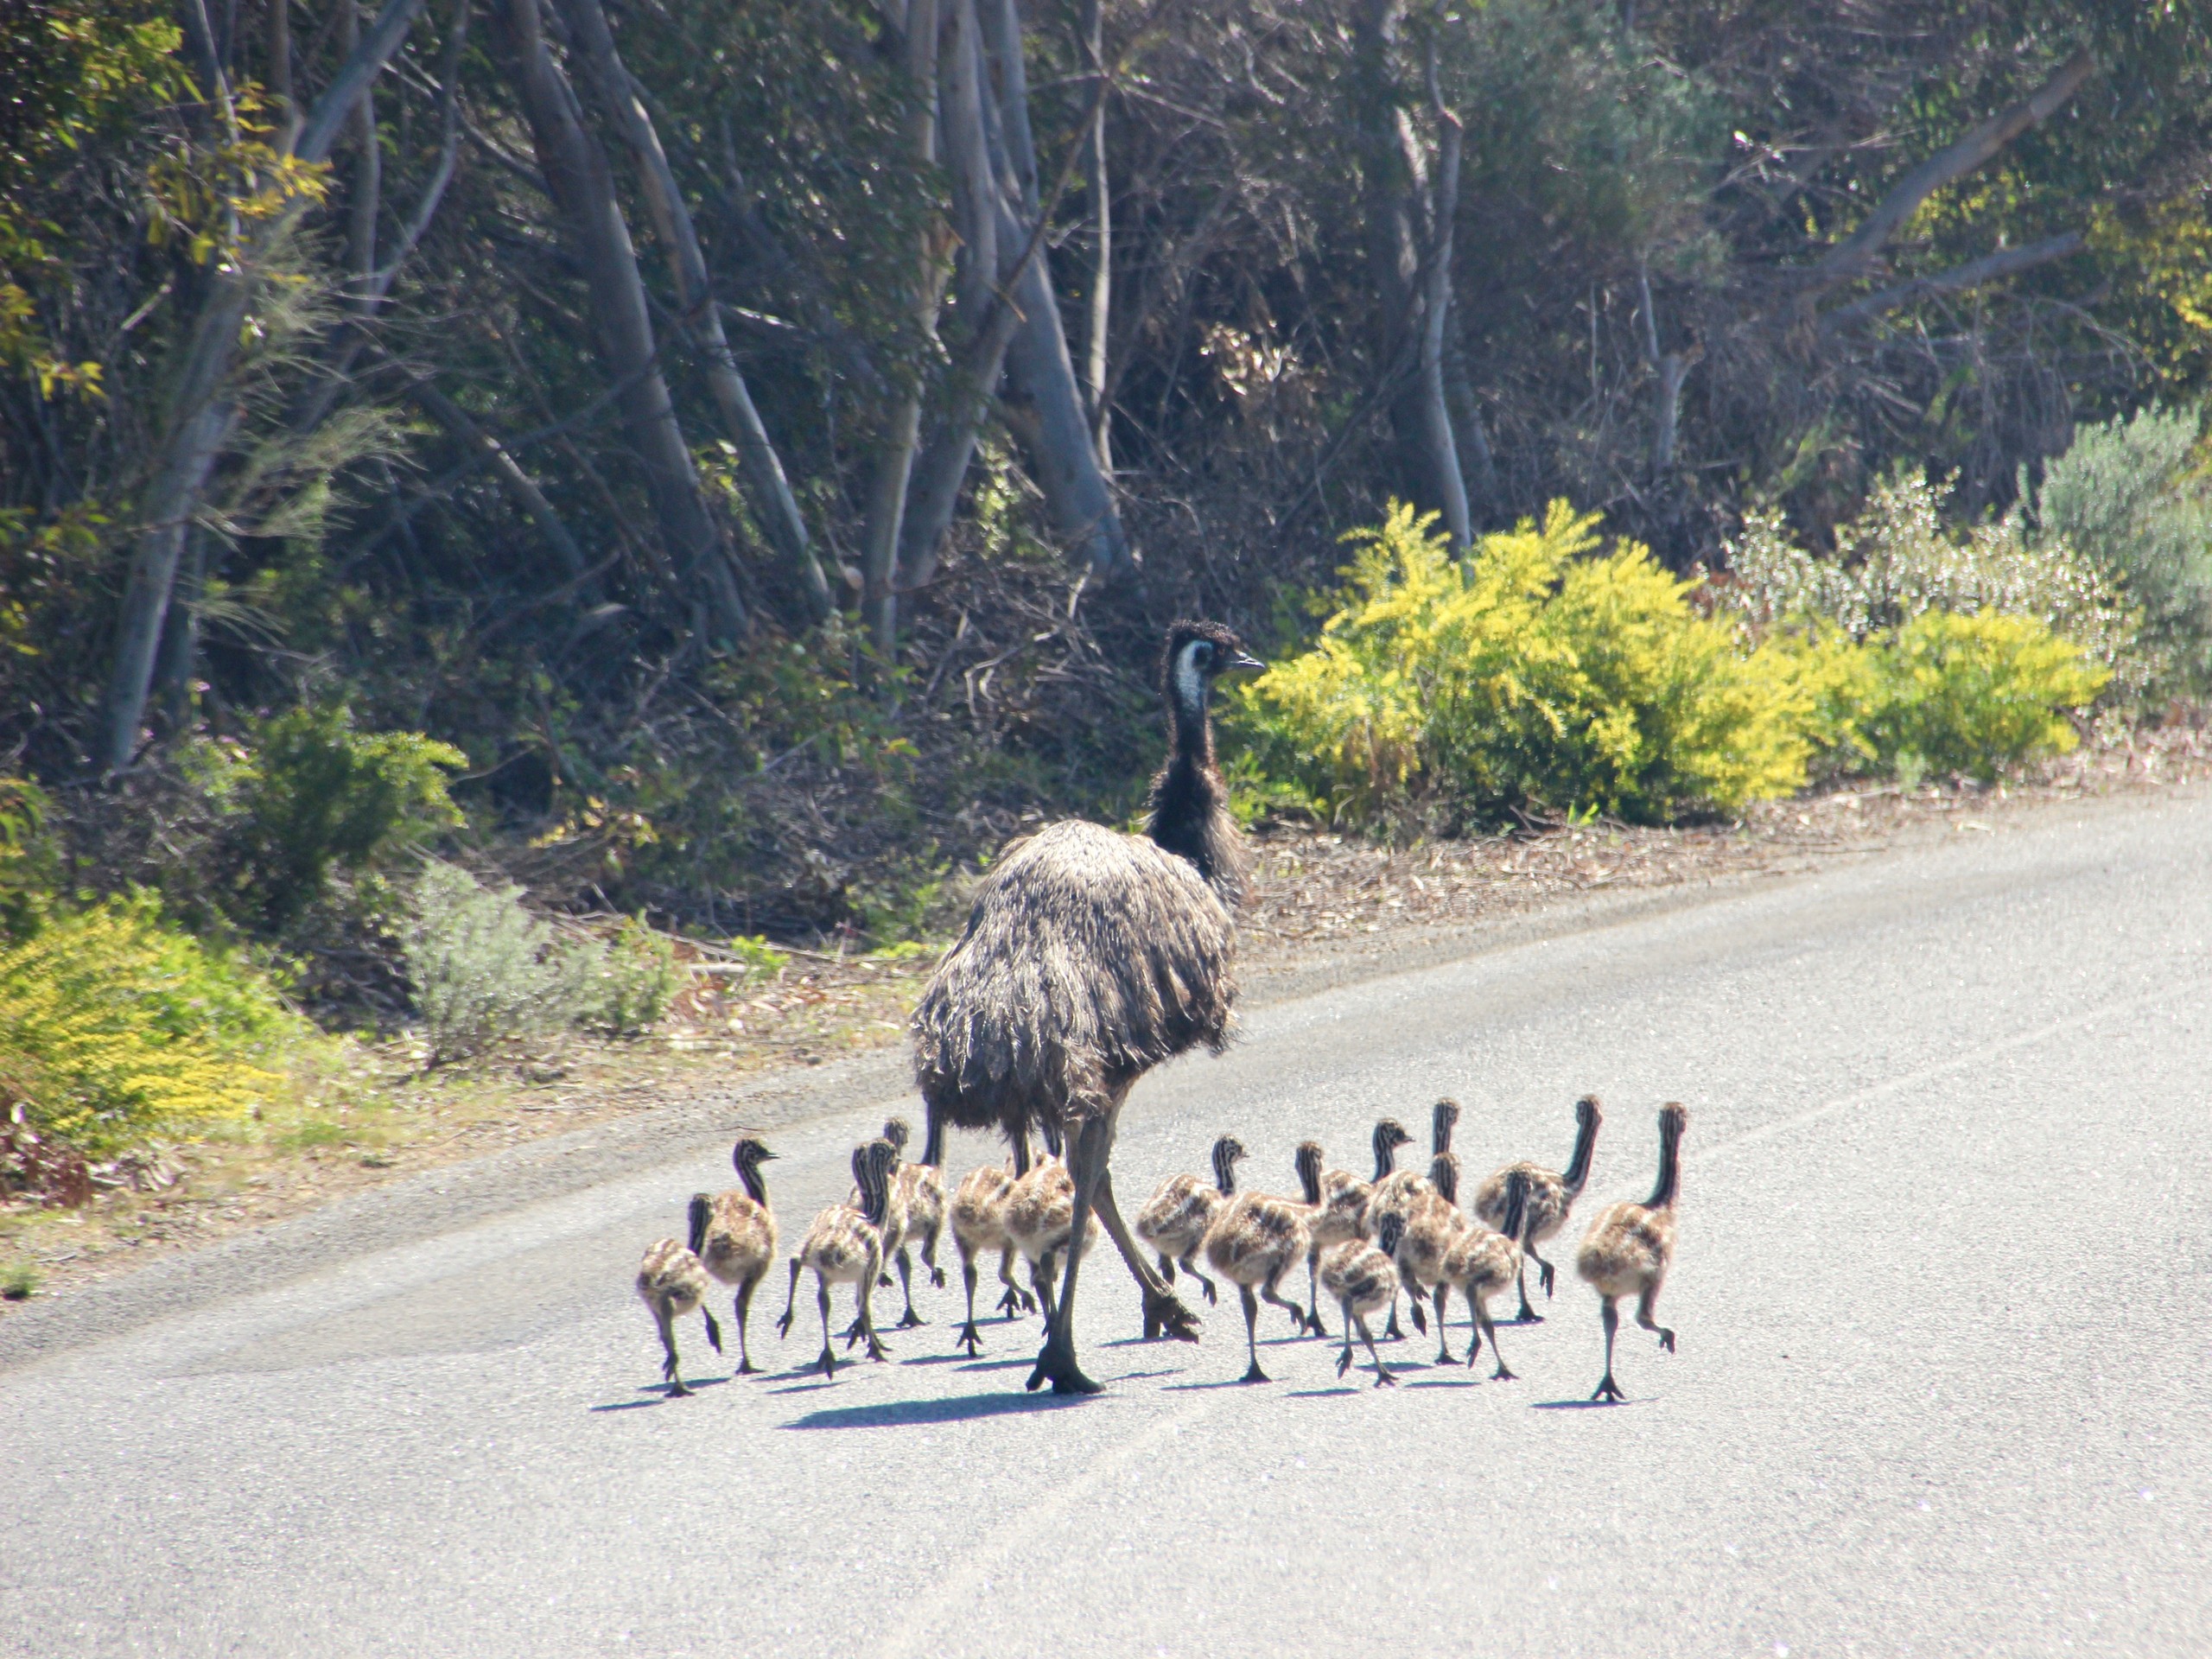 Emu family on a road near Port Lincoln